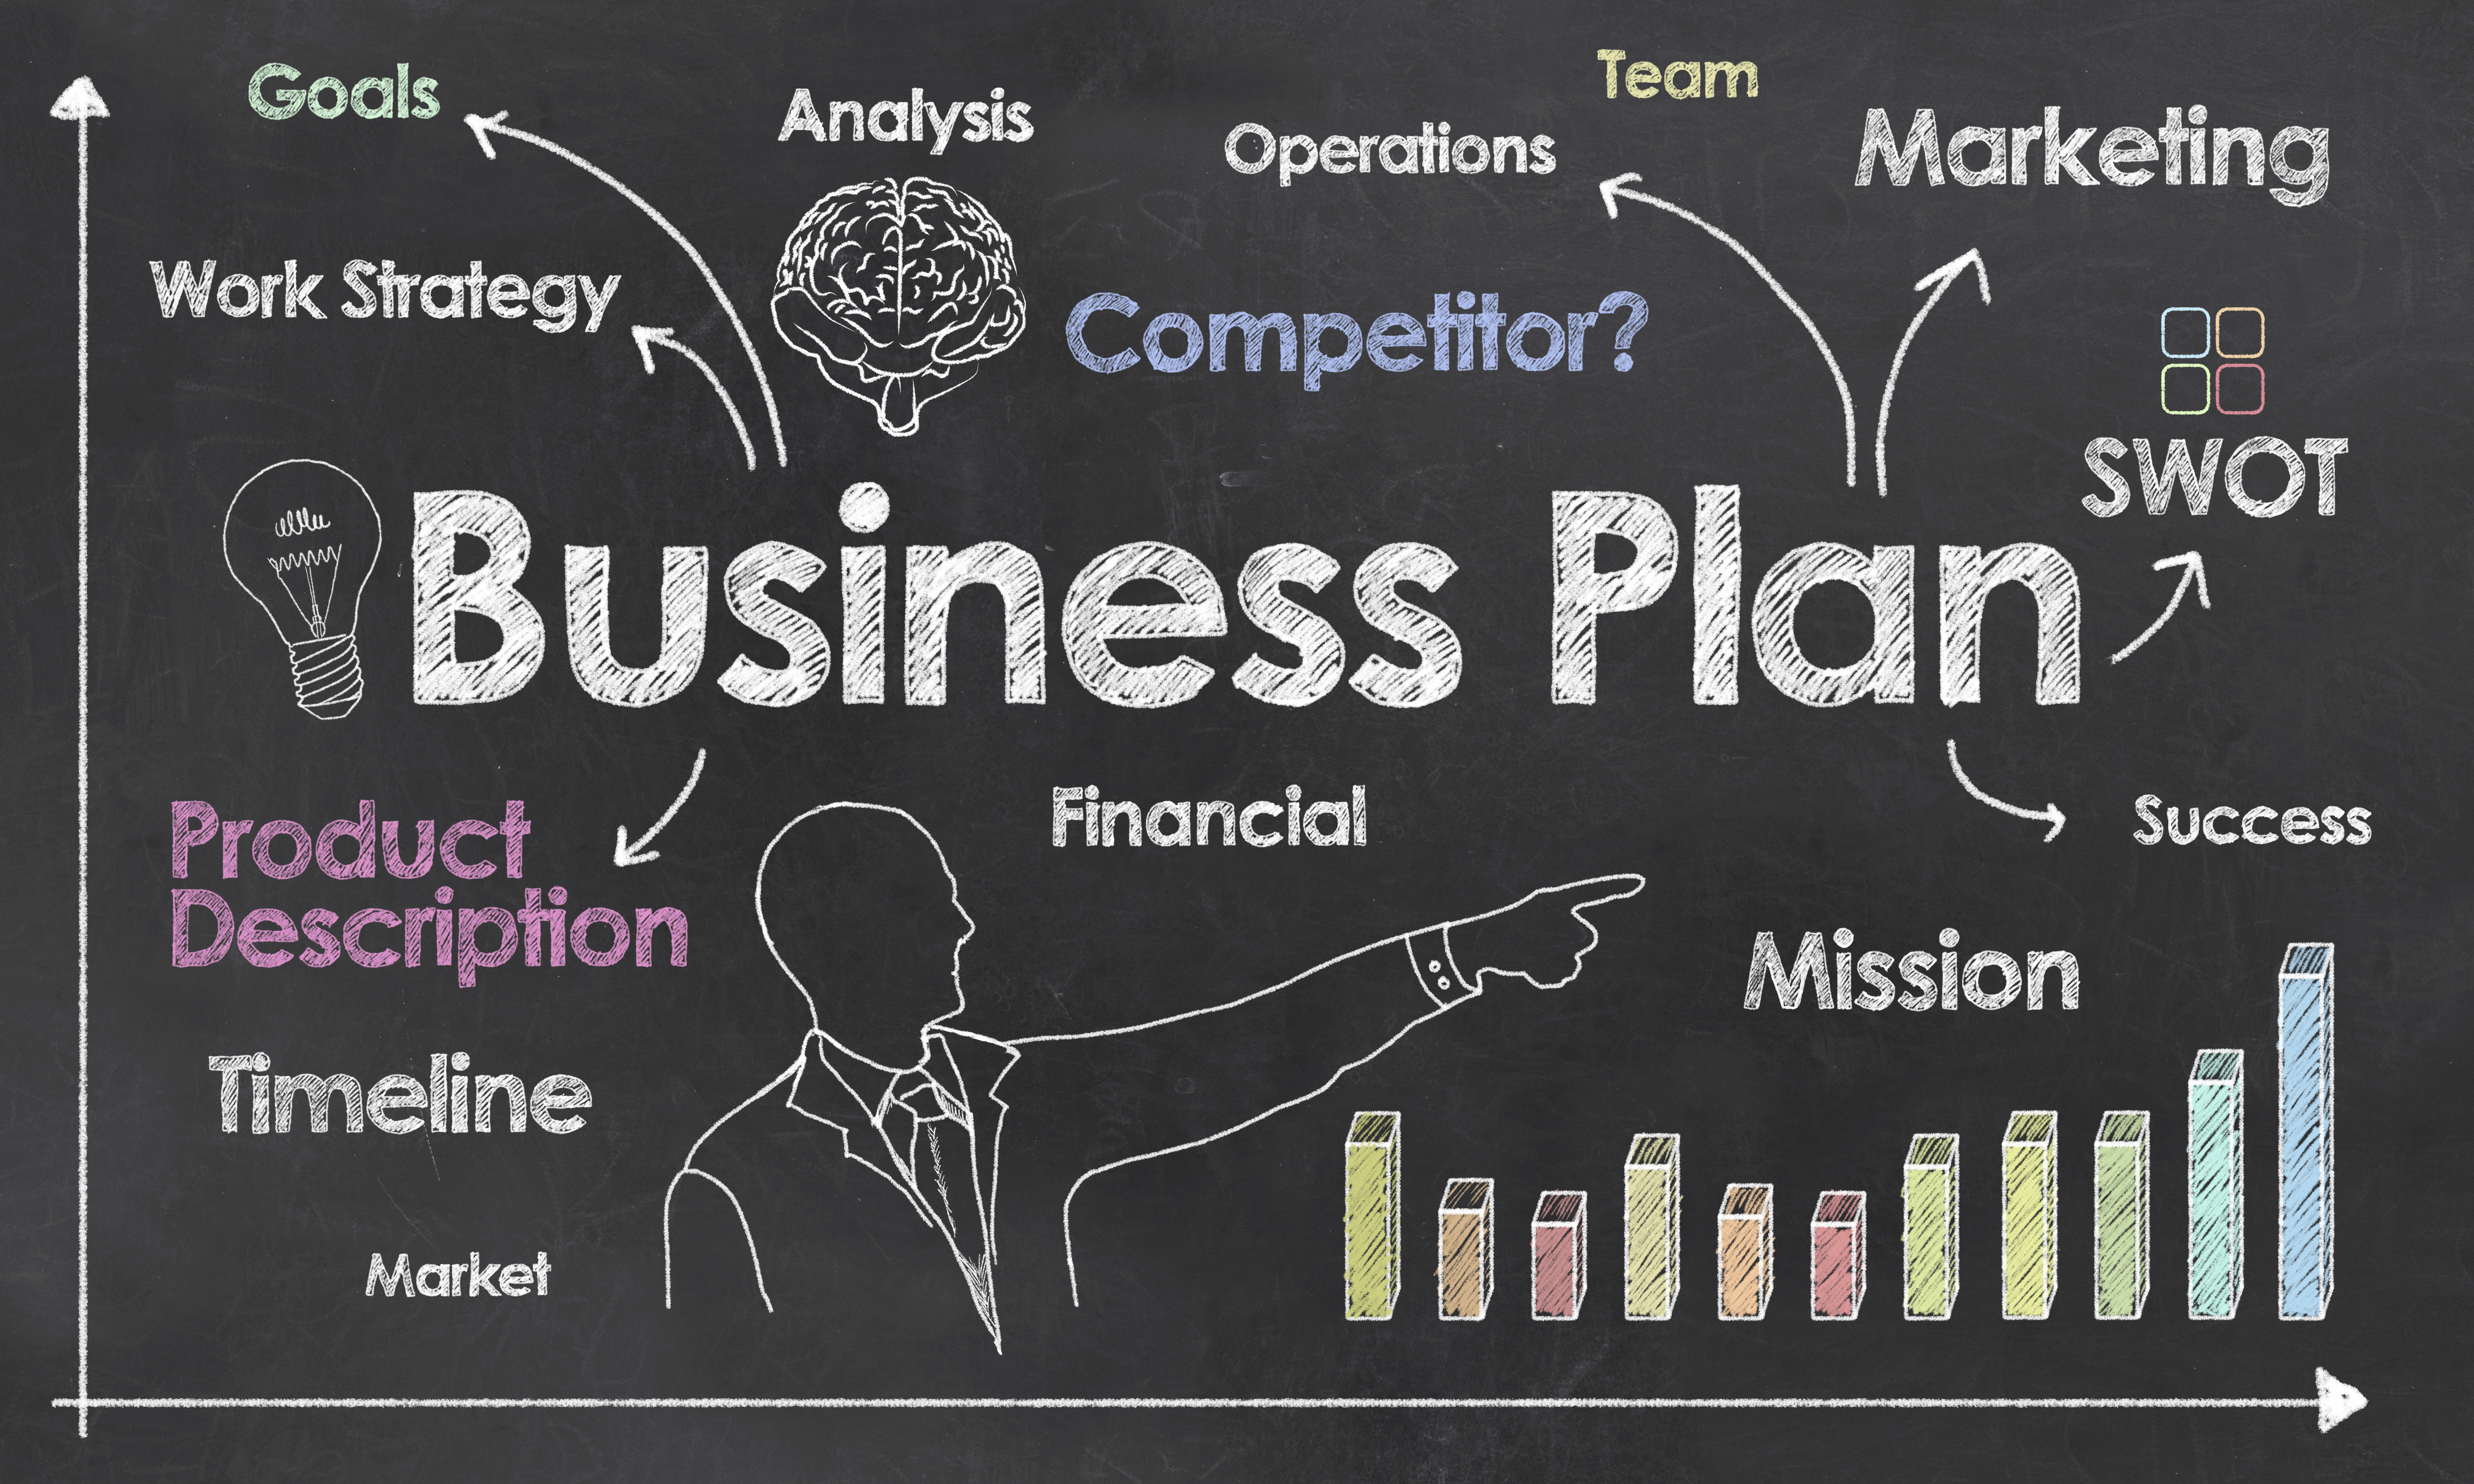 a common use of business plans is to